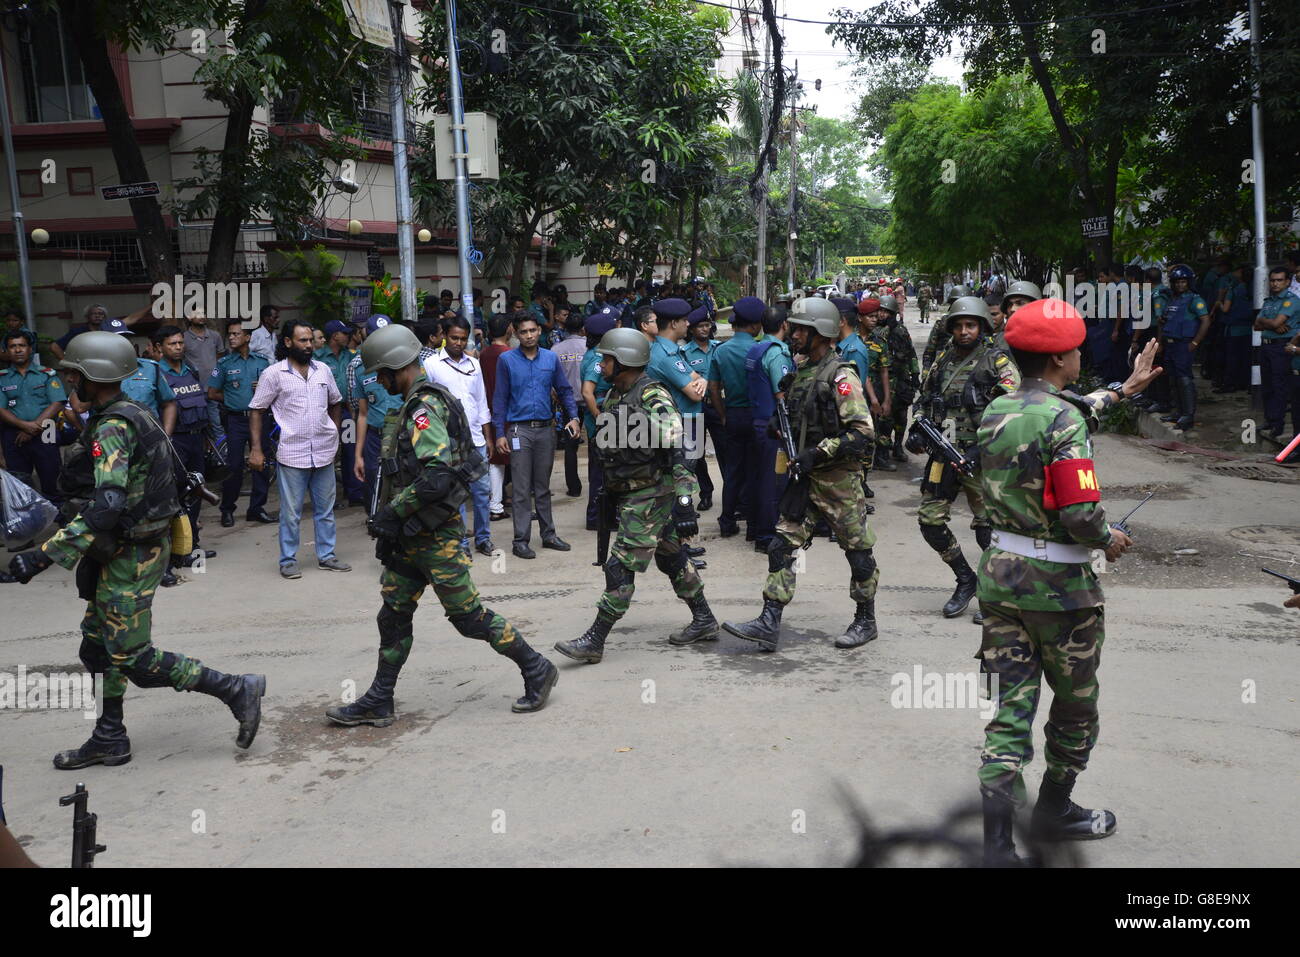 Bangladeshi soldiers and police walk along a street leading to an upscale restaurant in Dhaka on July 2, 2016, following a bloody siege there by armed attackers that began on July 1. Heavily armed militants murdered 20 hostages in Bangladesh, hacking many of their victims to death, before six of the attackers were gunned down at the end of a siege July 2 at a restaurant packed with foreigners. As the Islamic State (IS) group claimed responsibility for the carnage at the start of the Eid holiday, Prime Minister Sheikh Hasina said she was determined to eradicate militancy in the mainly Muslim na Stock Photo